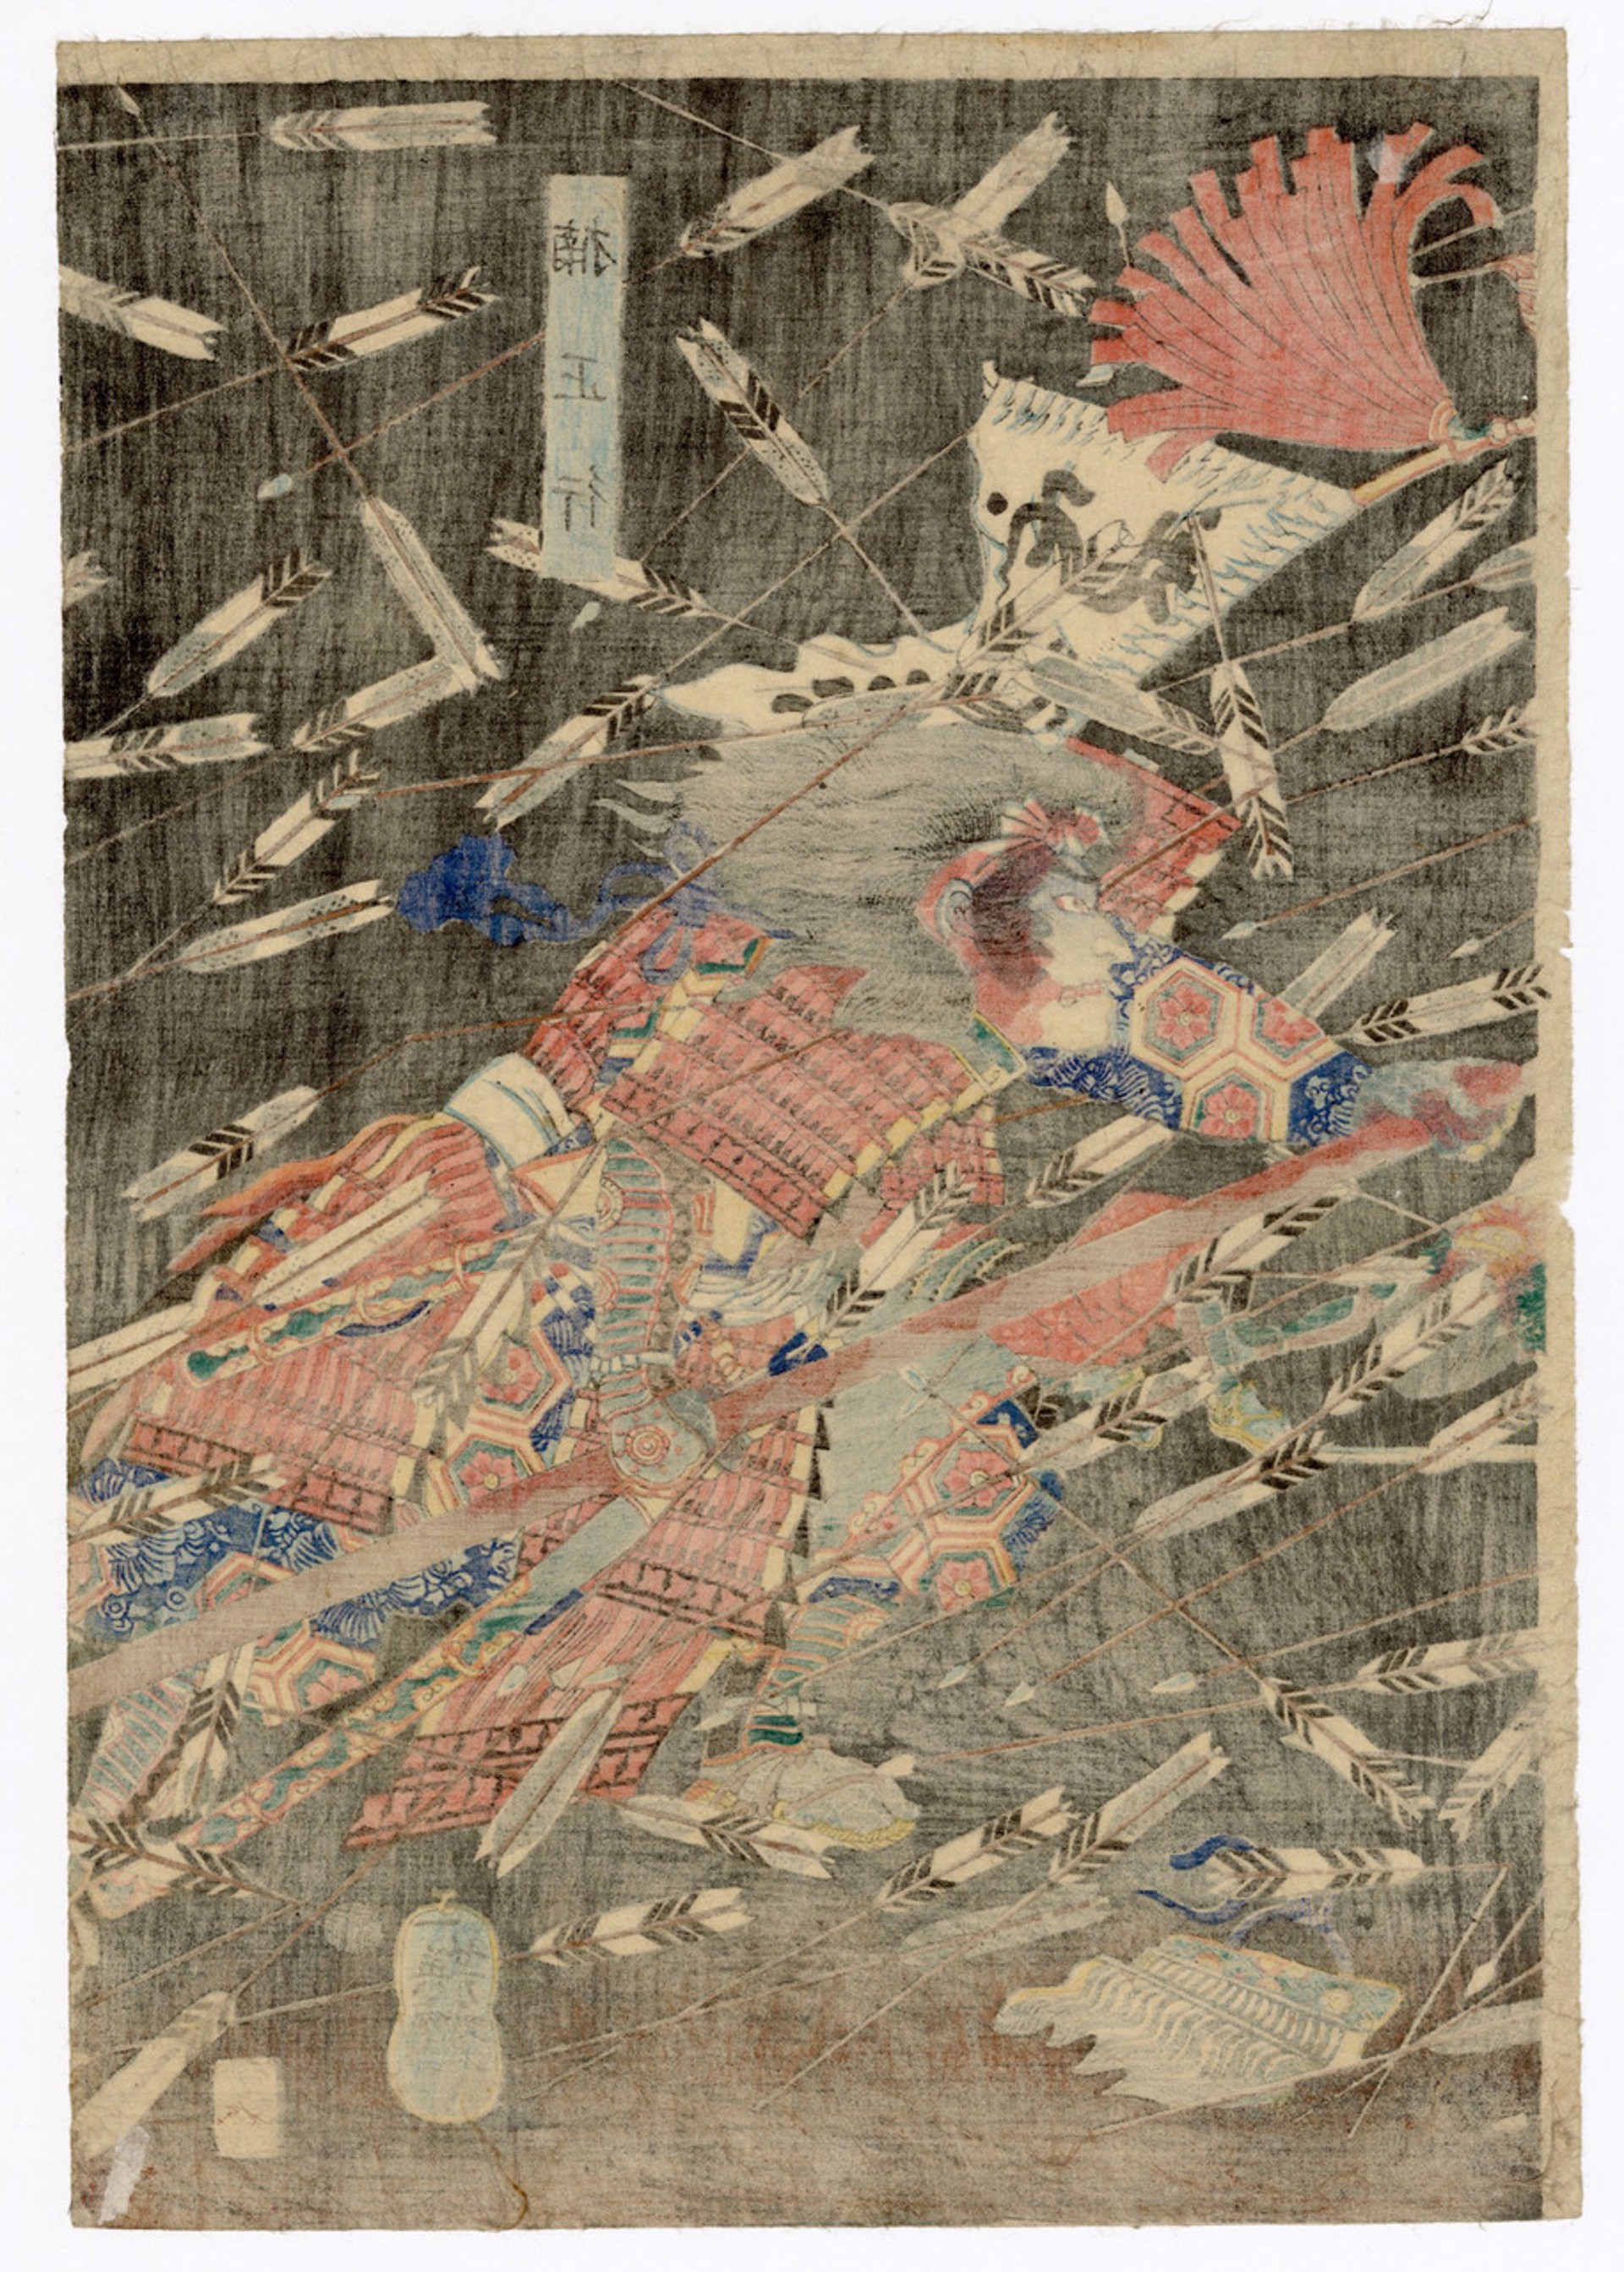 The Last Stand of the Kusunoki Clan at the Battle of Shijo Nwate by Yoshitsuya